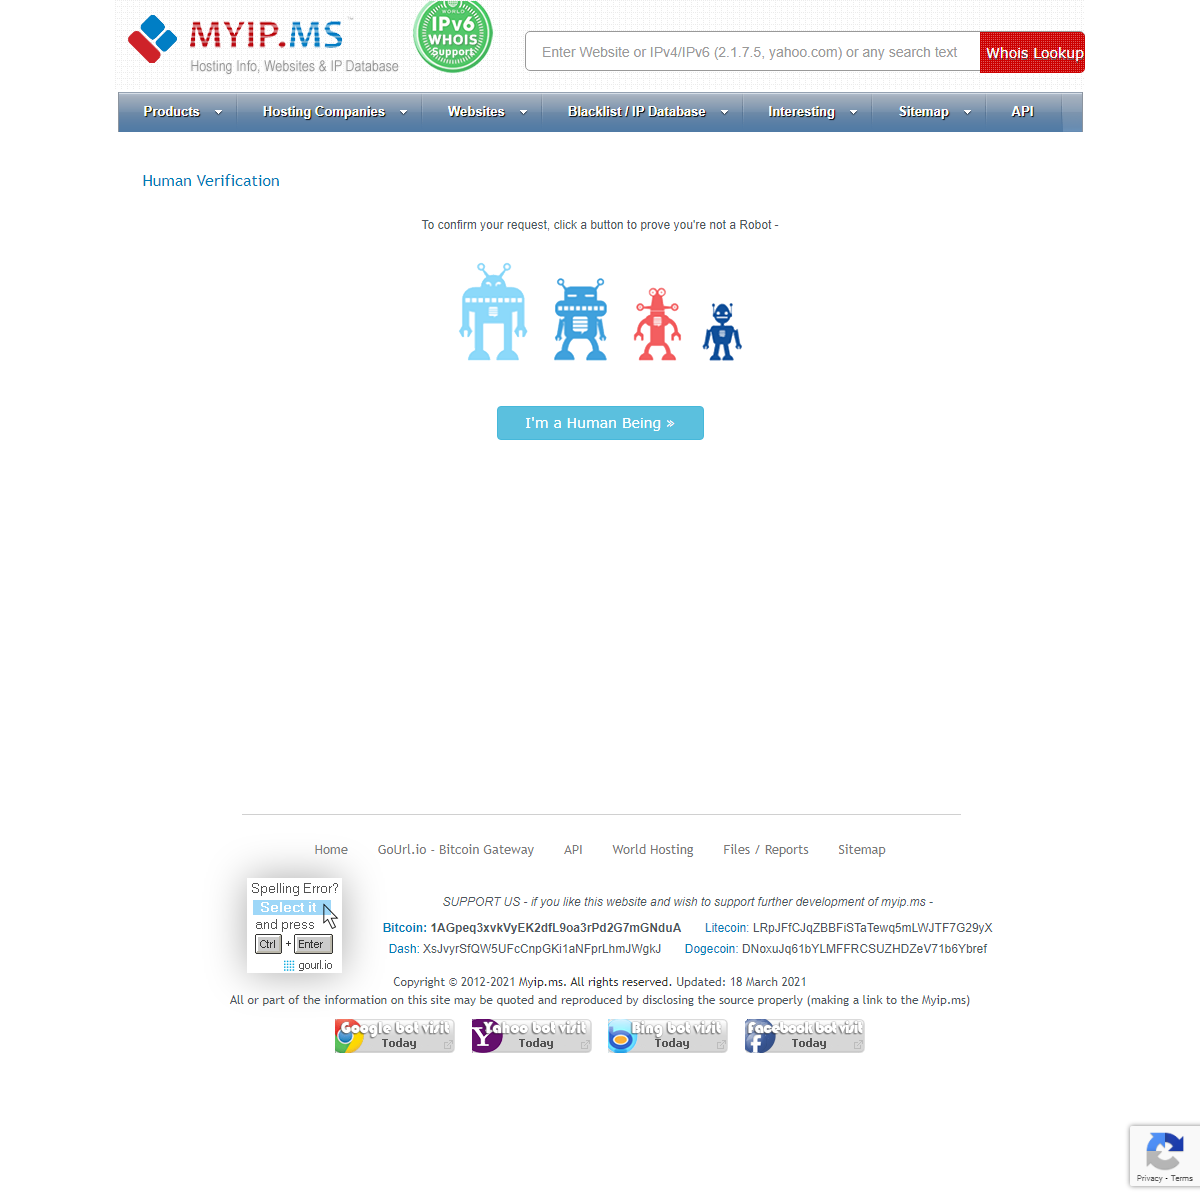 A complete backup of https://myip.ms/view/hosts/9296/idfnv_net.html